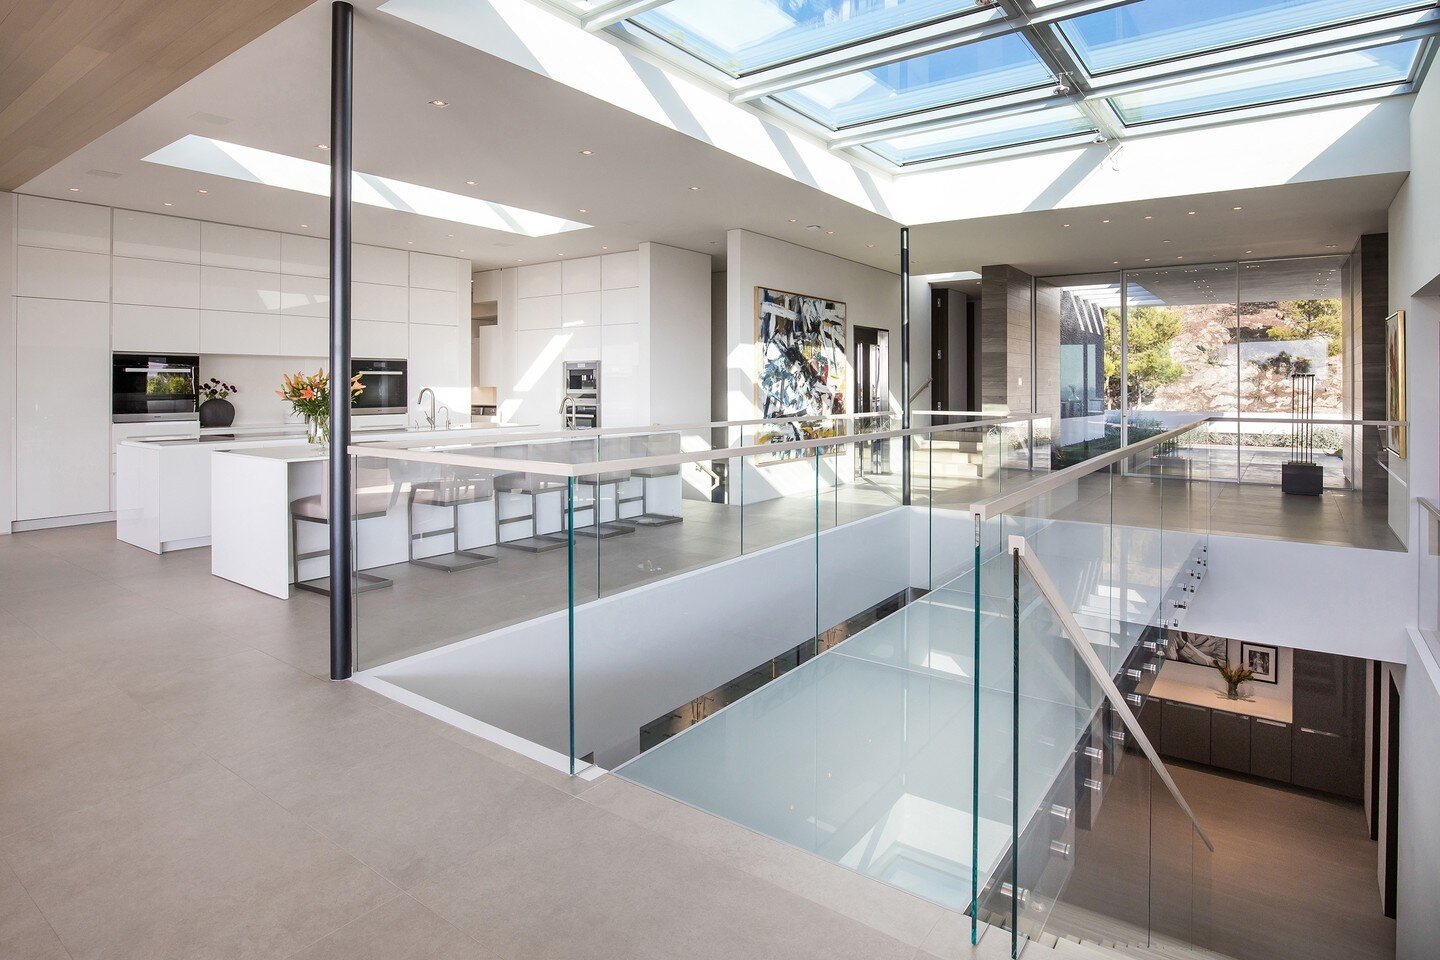 The bright light filled interior of our Trousdale House features skylights, an open volume atrium, glass walls, and a floating glass bridge. Photo by @jasonspethphoto